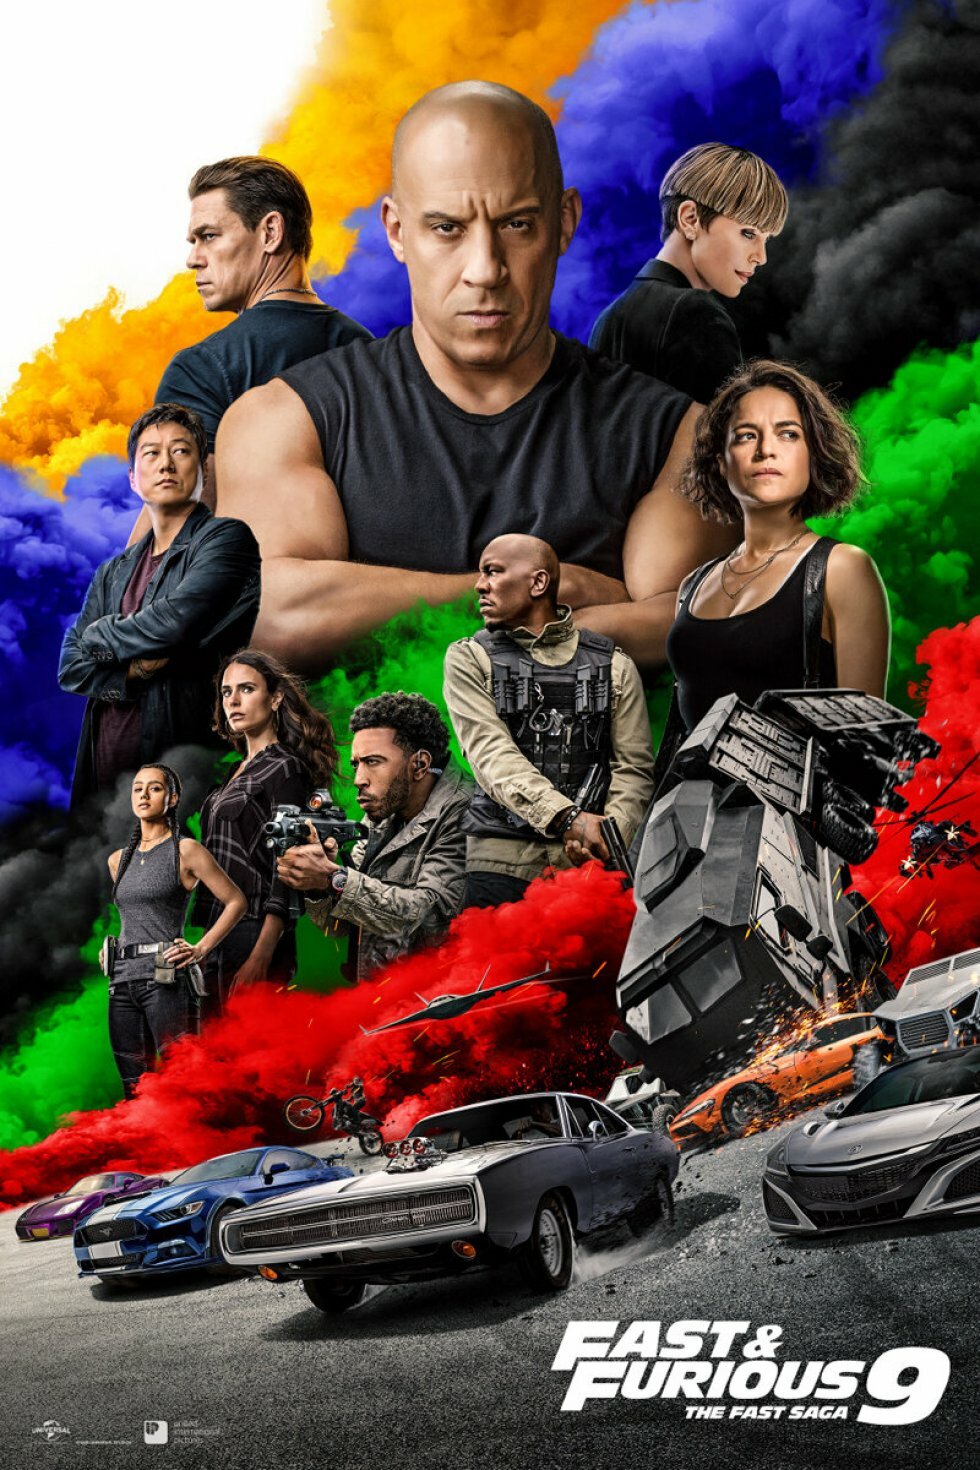 Anmeldelse: Fast & Furious 9